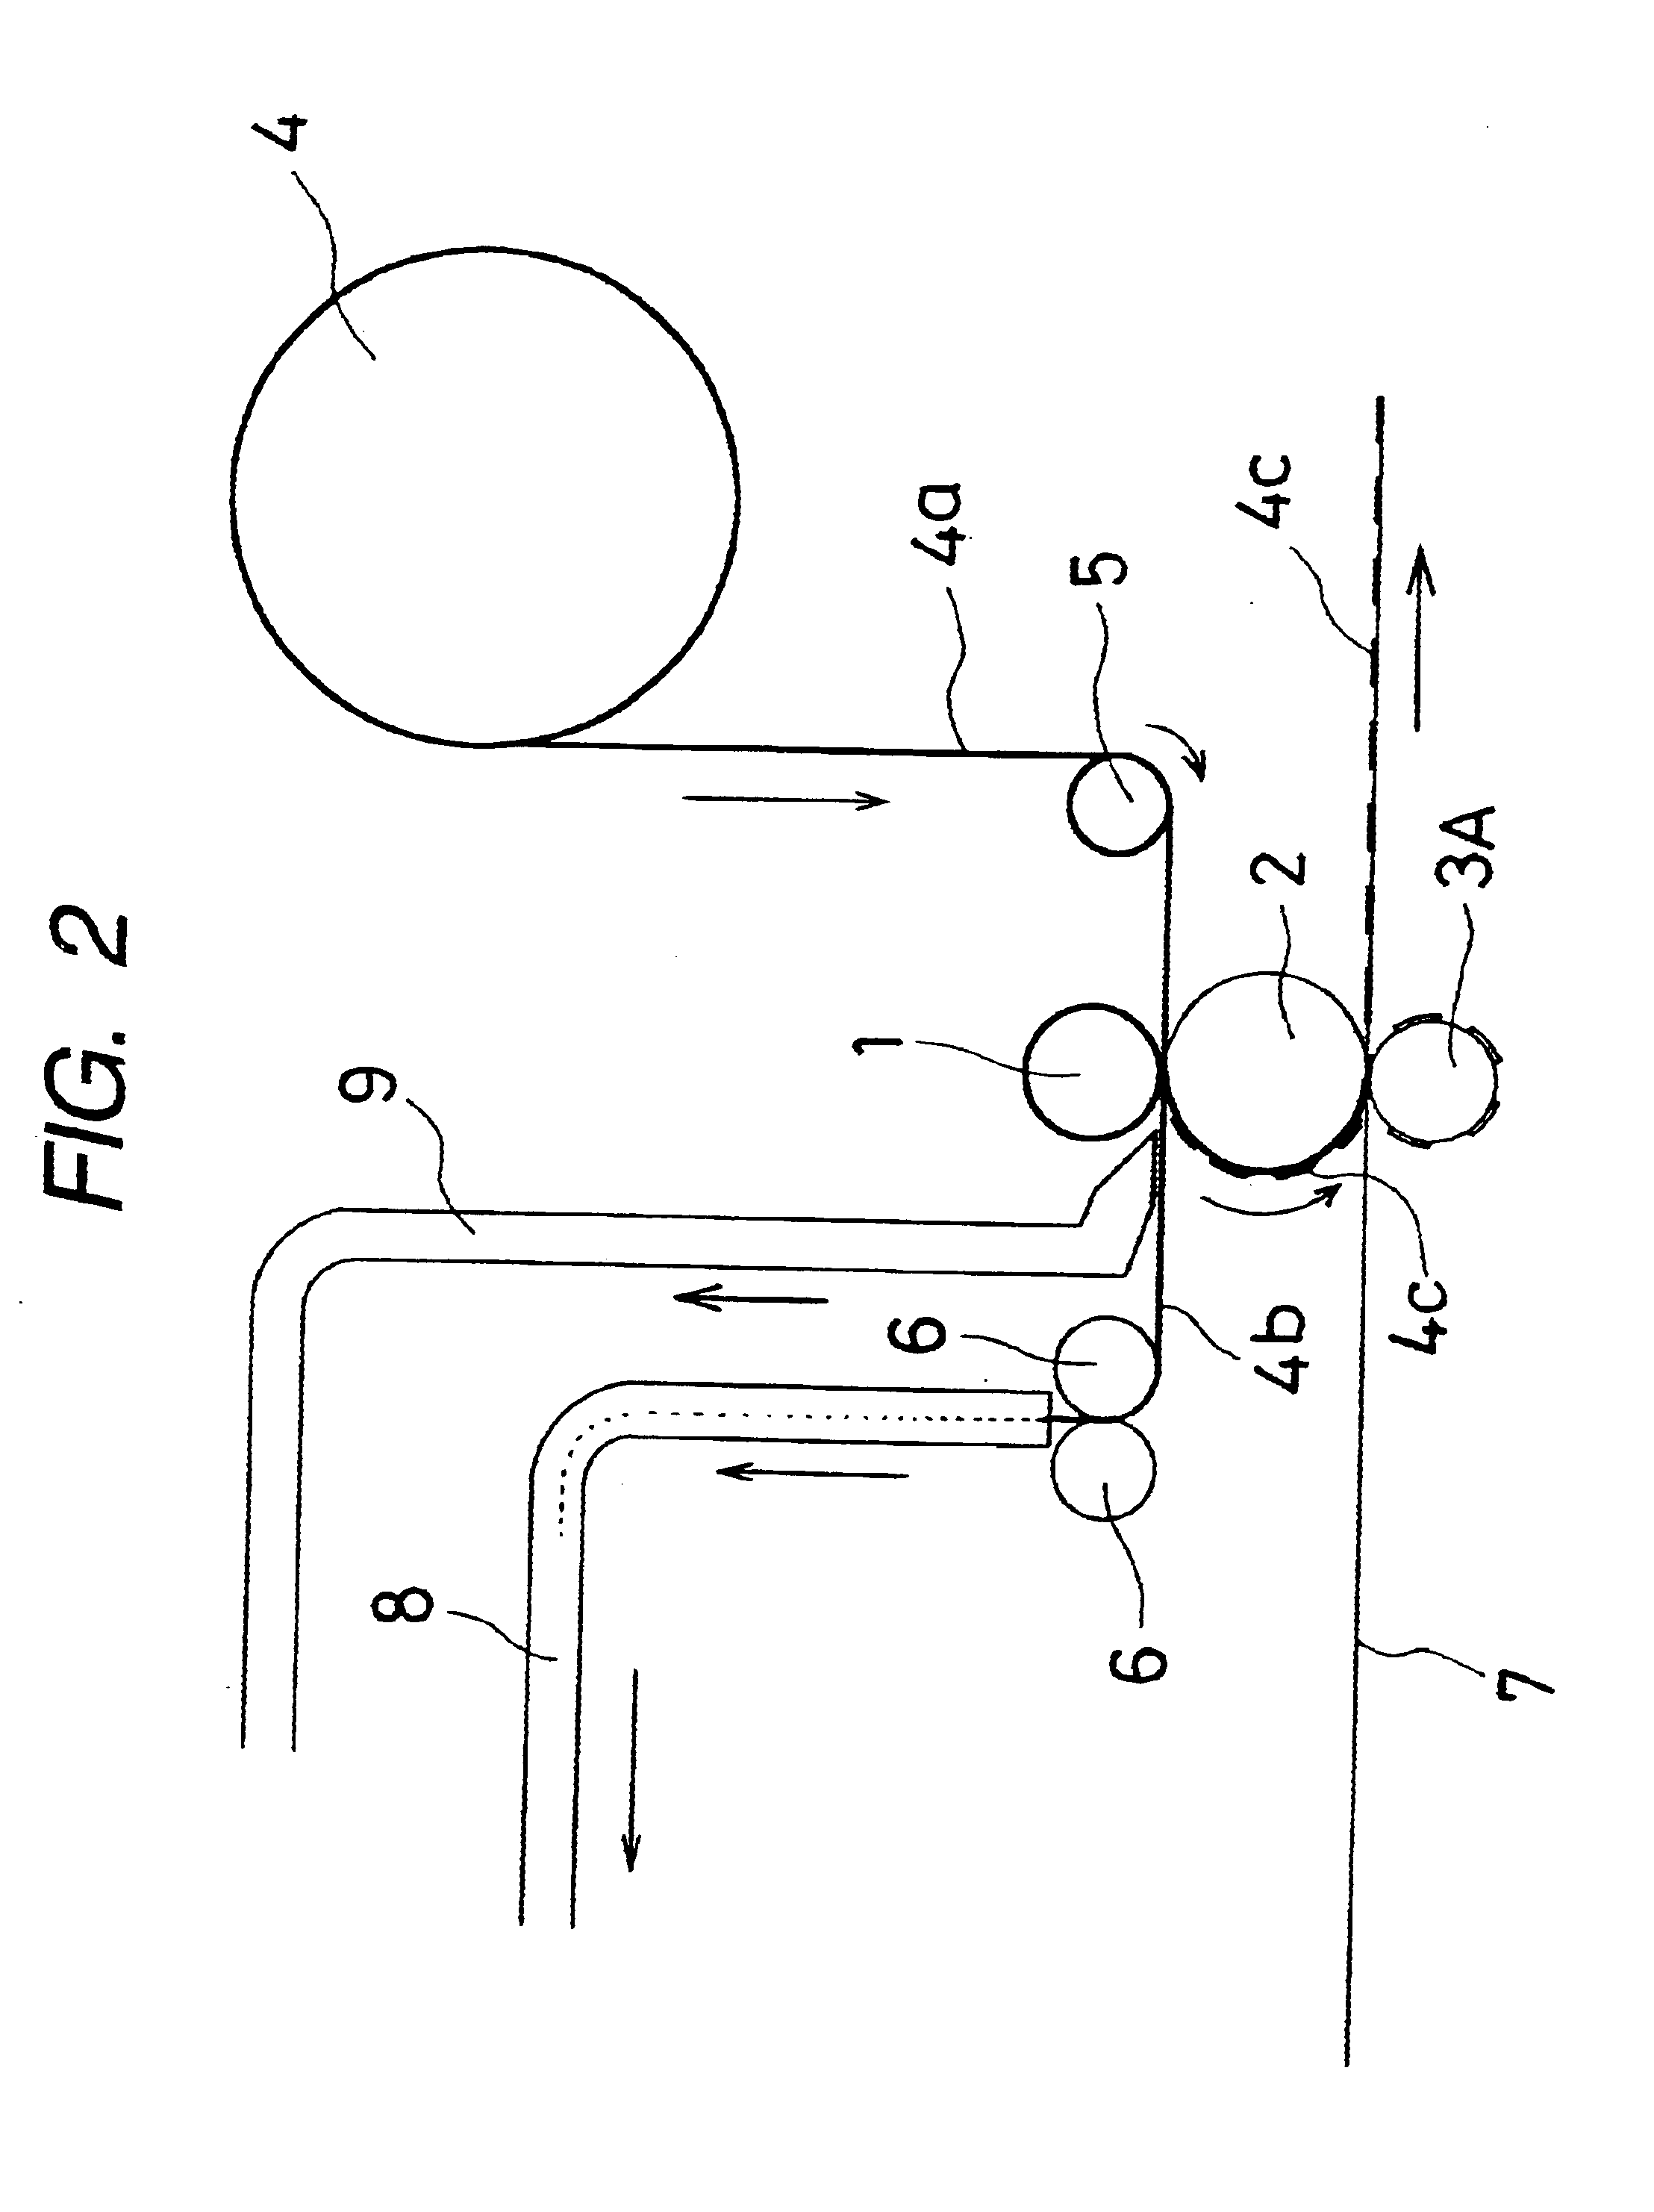 Process for producing resonant tag